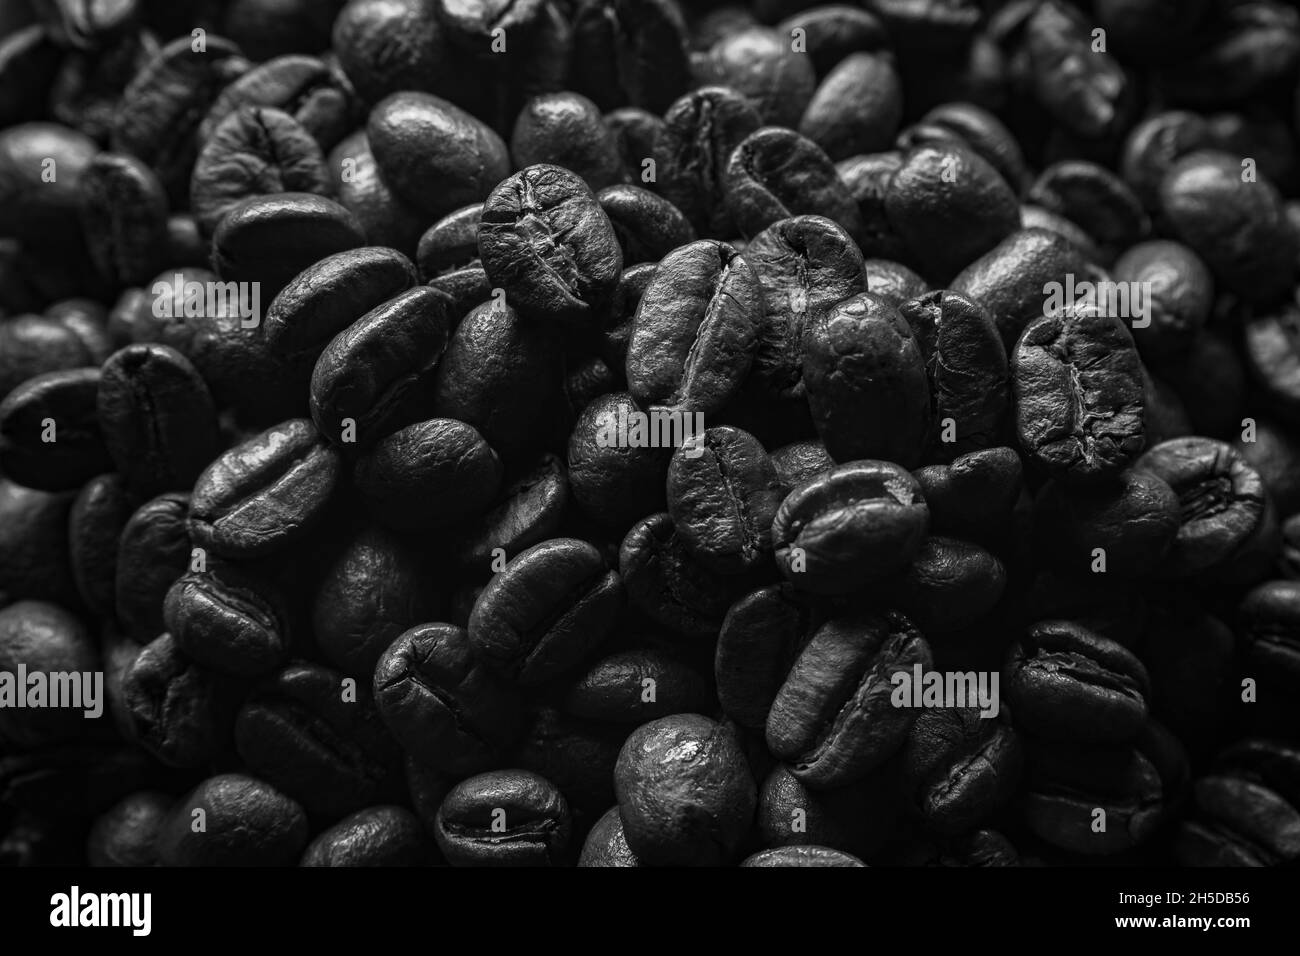 Artistic black and white pile of roasted coffee beans Stock Photo